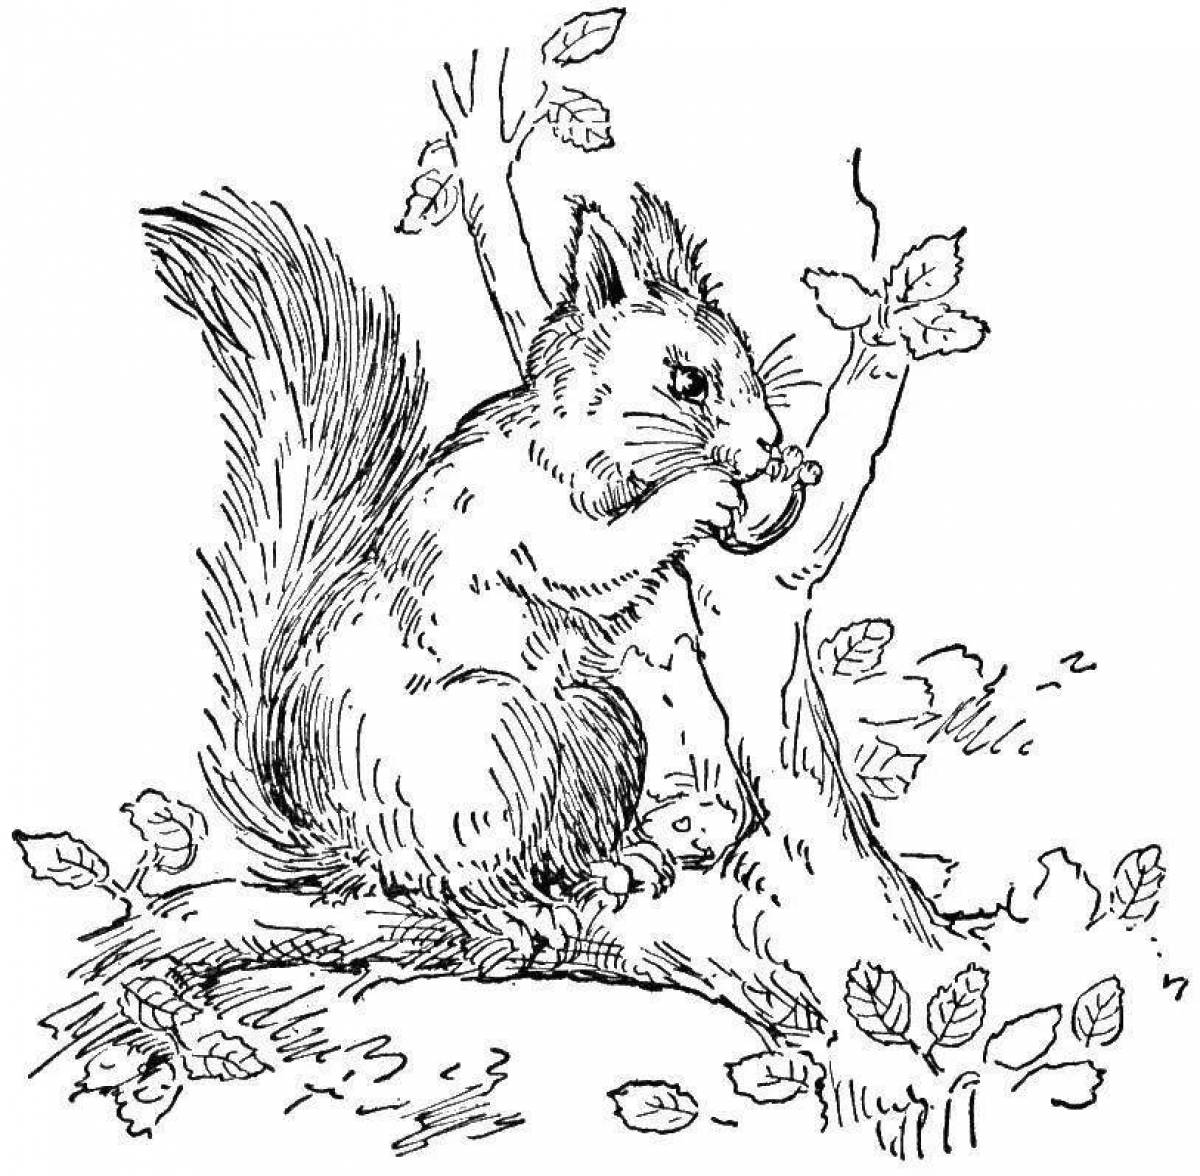 Animated coloring of a squirrel on a tree